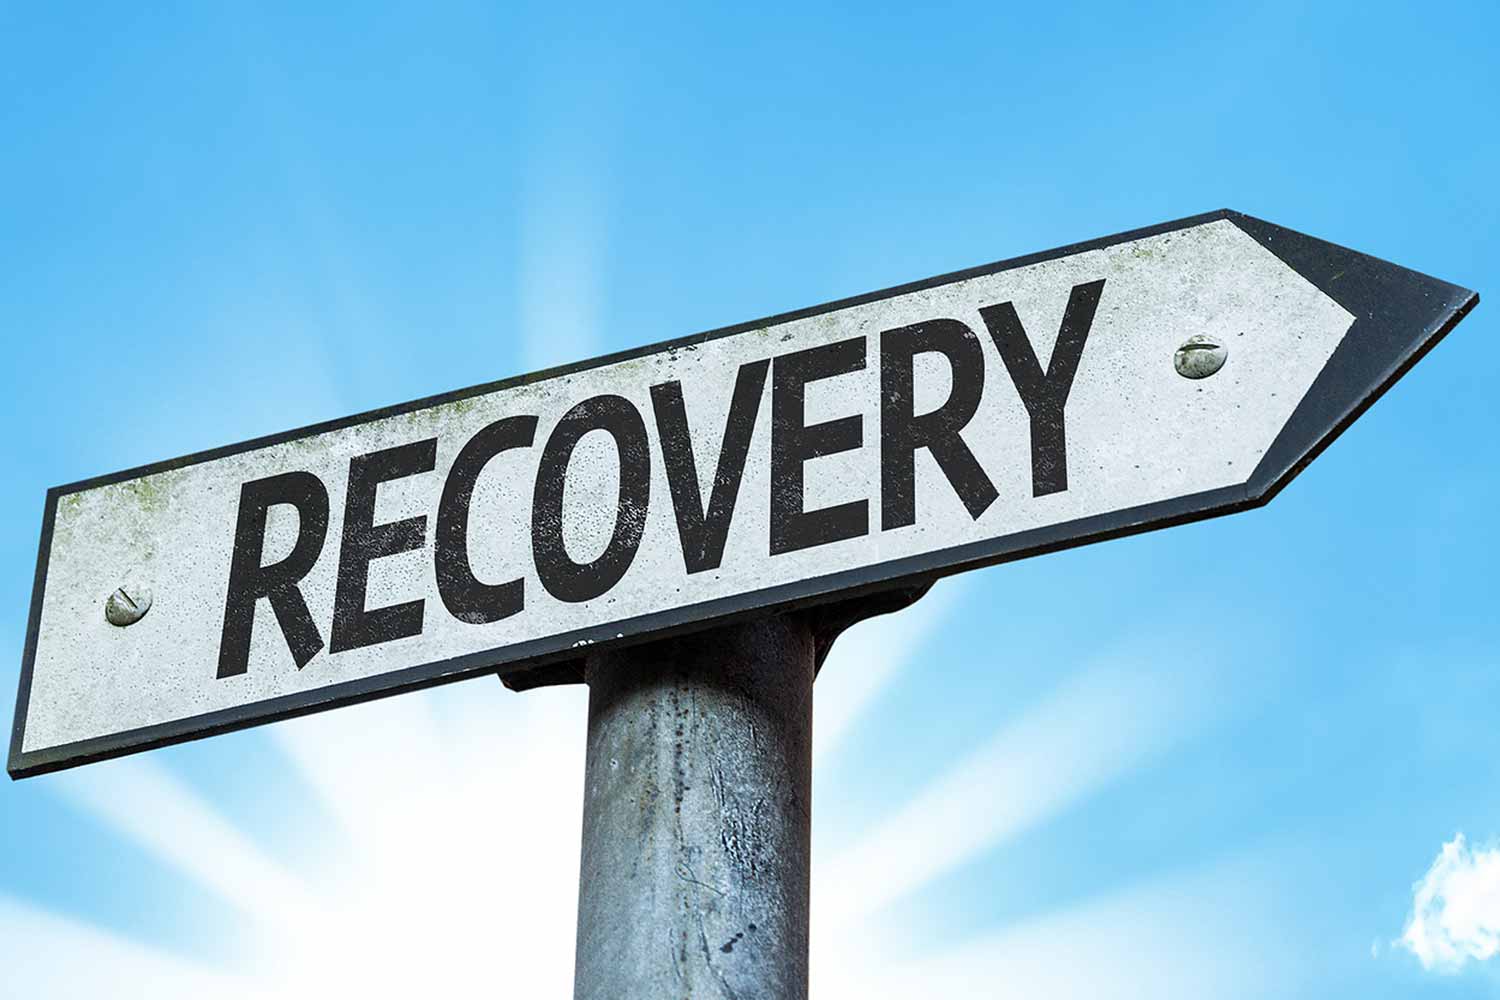 Expectations in Addiction Recovery